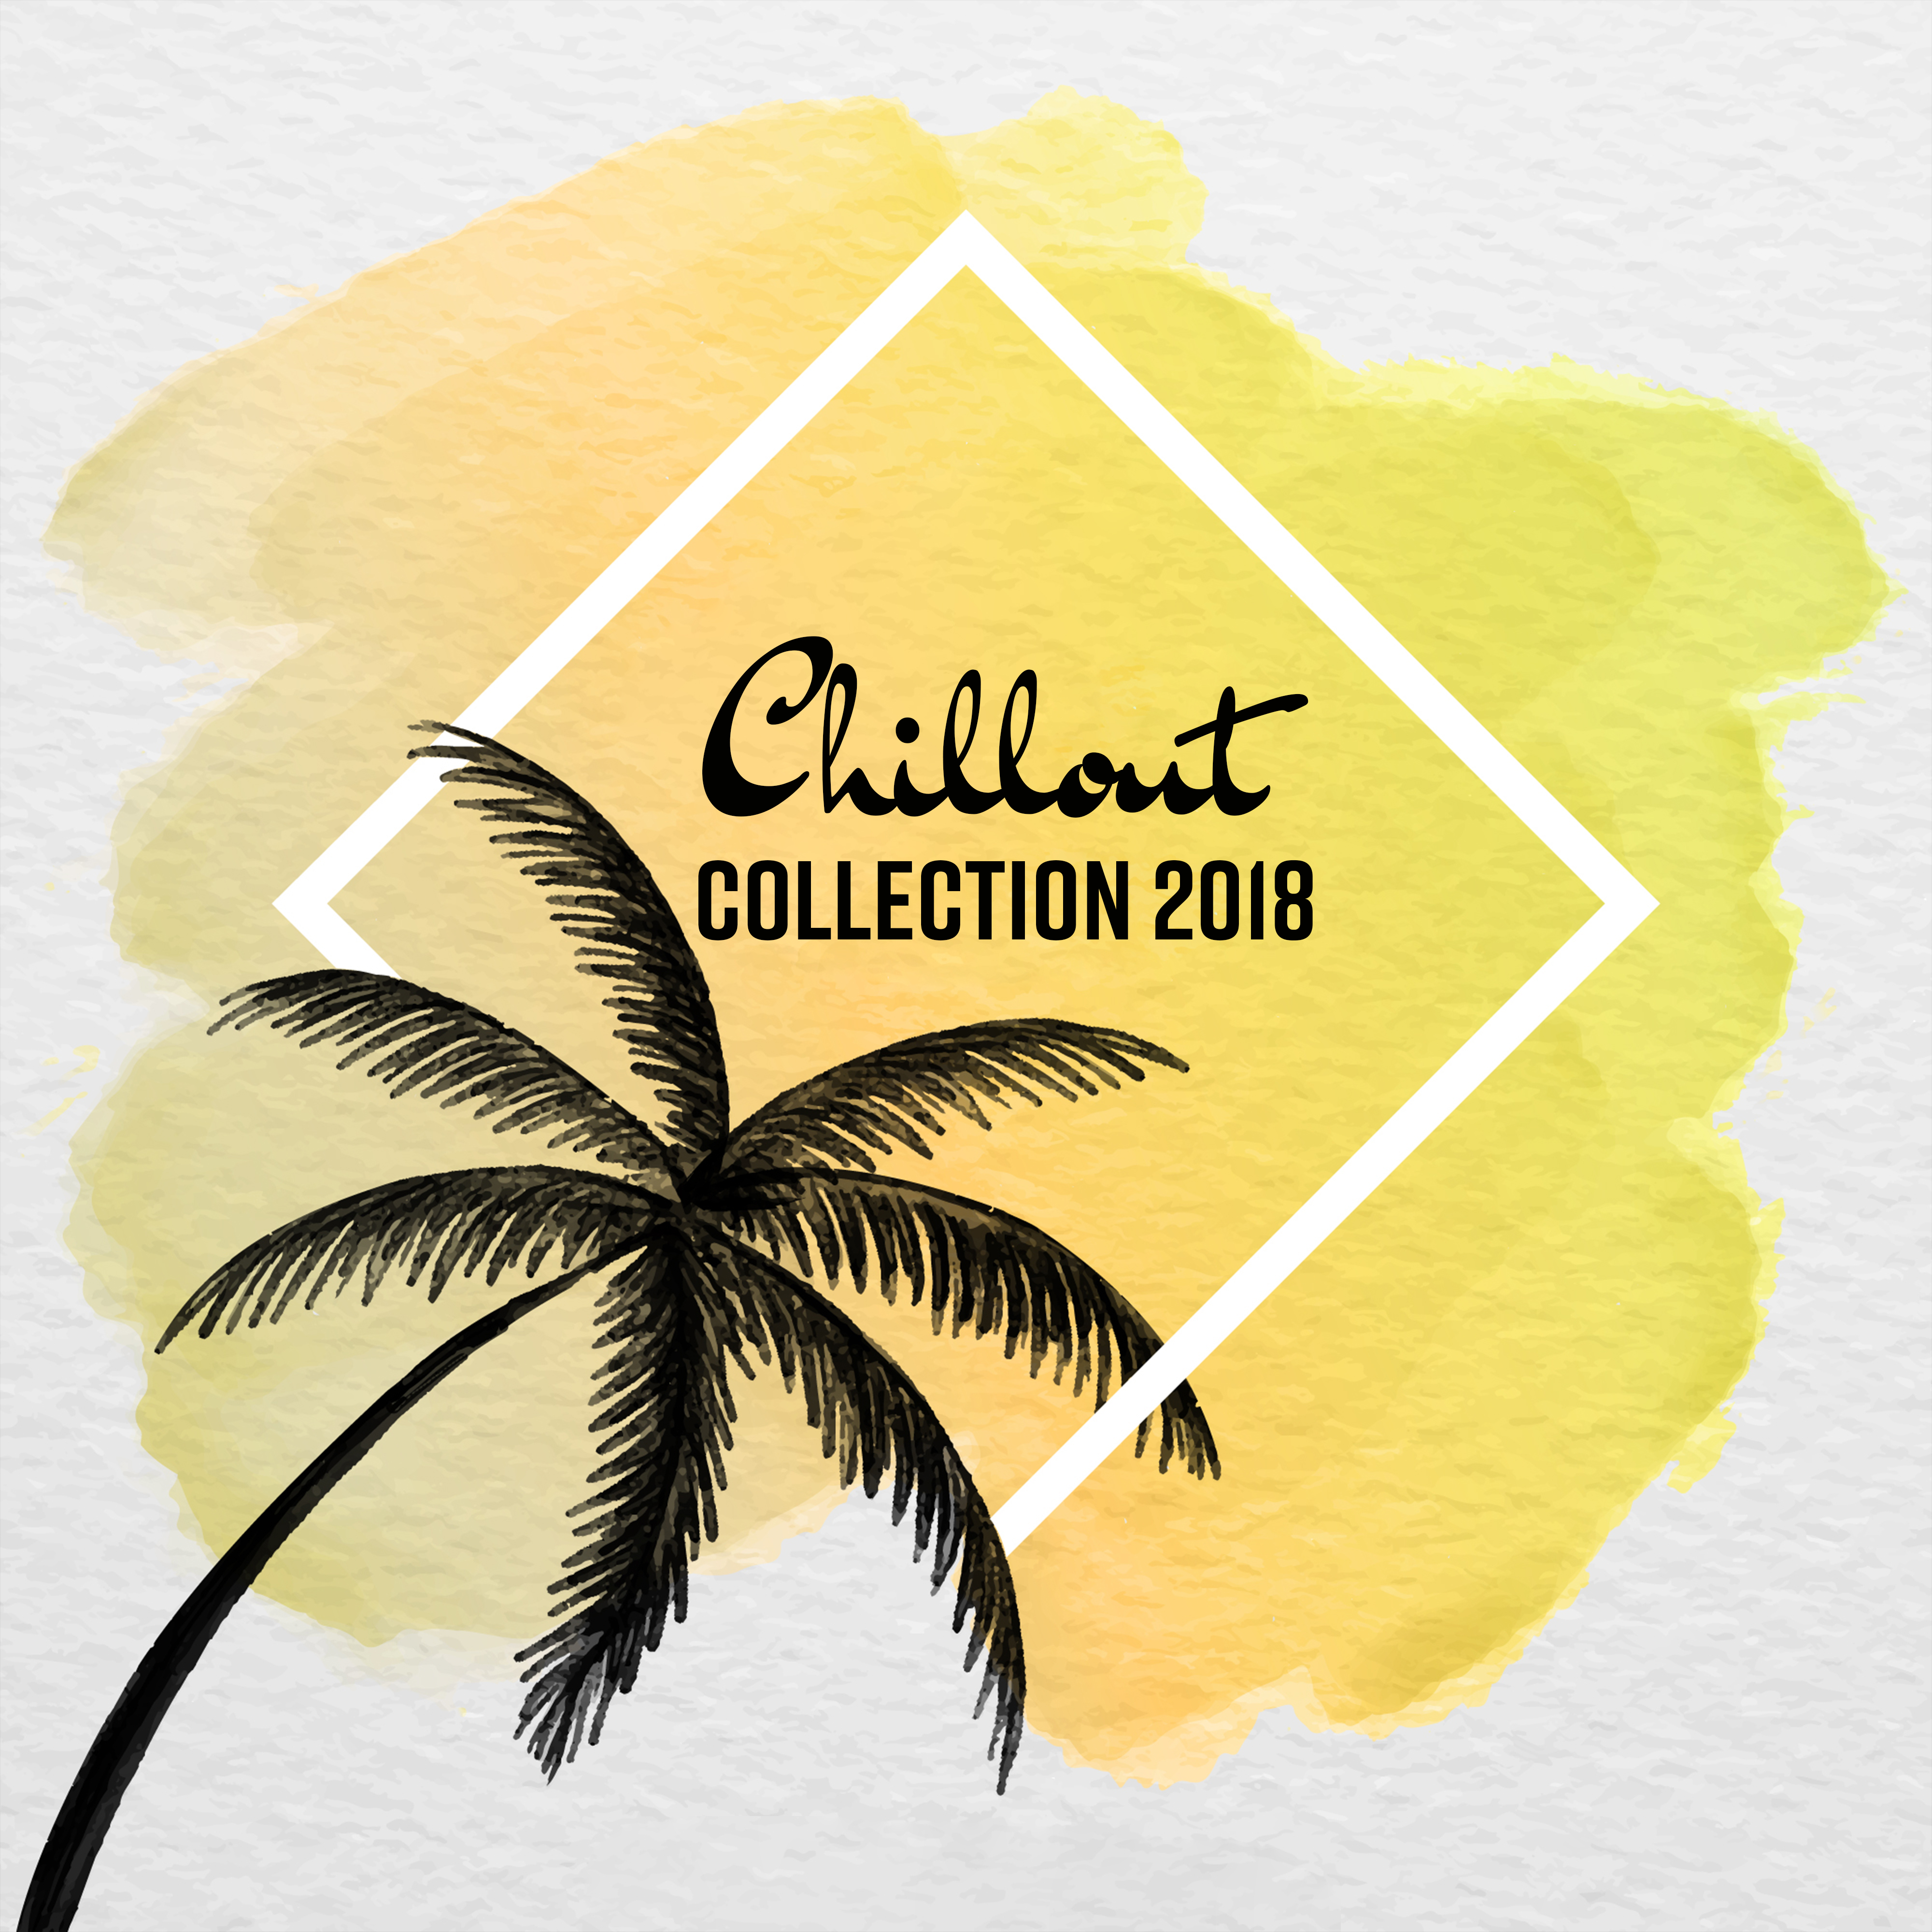 Chillout Collection 2018